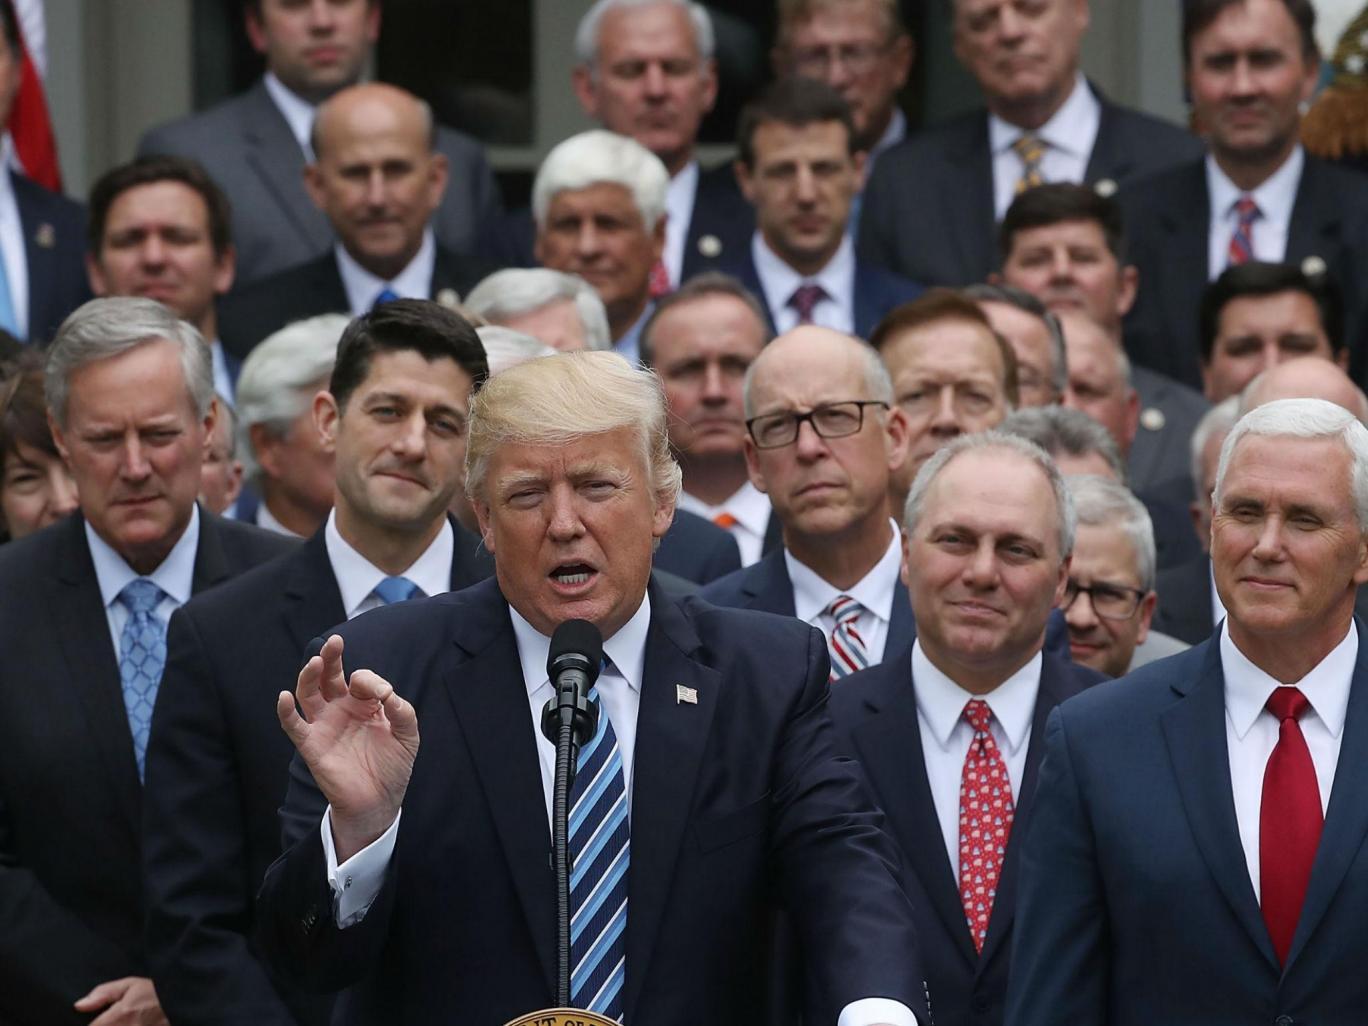 Donald Trump speaks while flanked by House Republicans after they passed legislation aimed at repealing and replacing ObamaCare on May 4, 2017 in Washington, DC